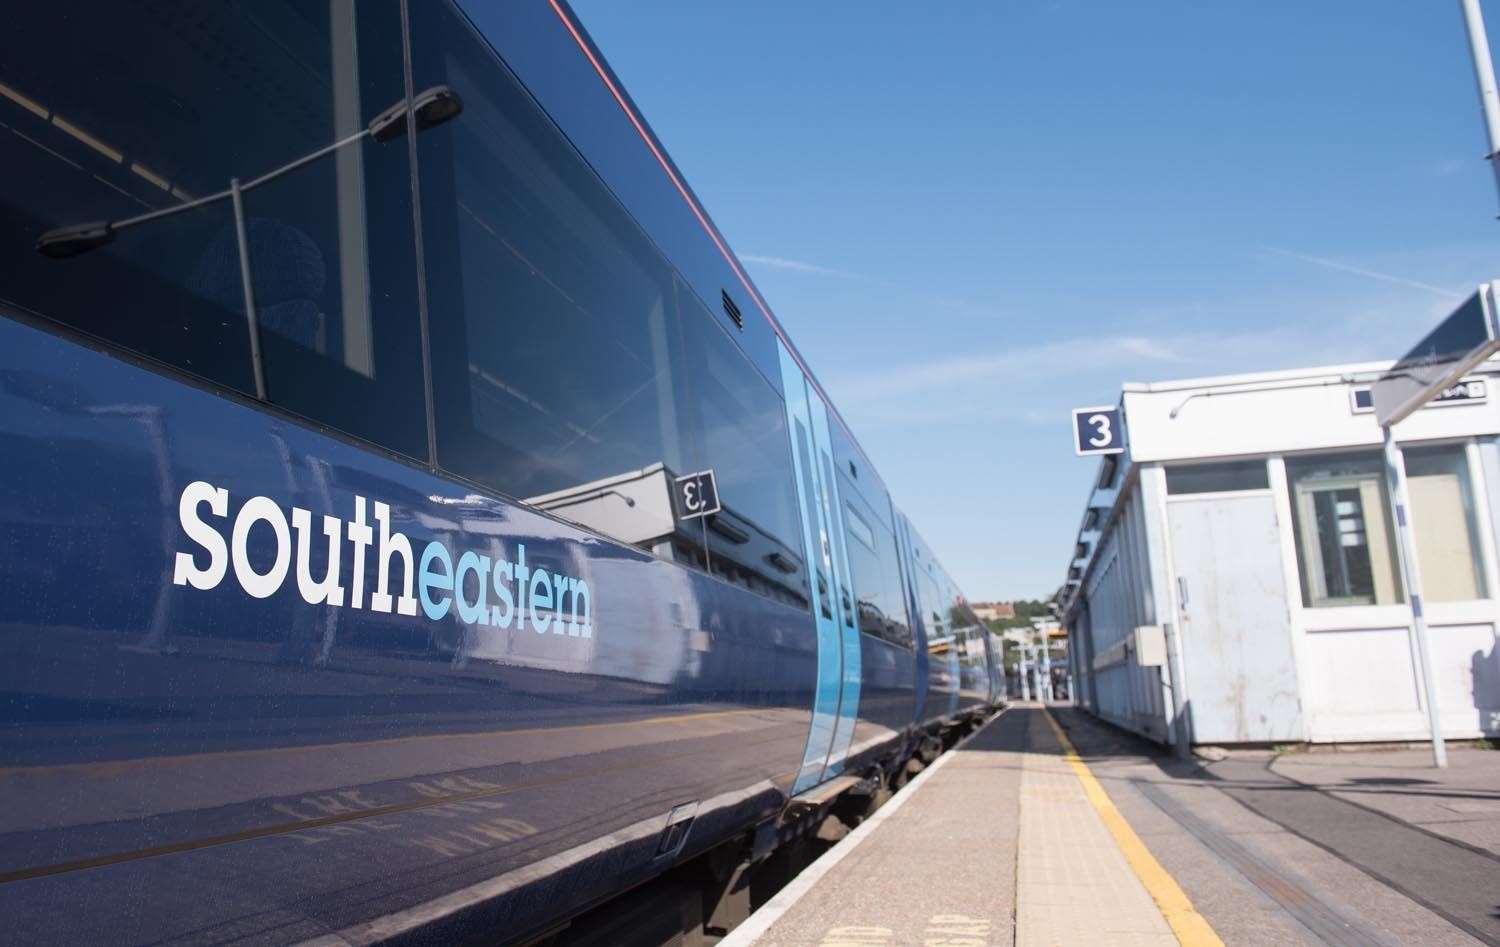 Travellers have complained to Southeastern about long waits and cramped conditions